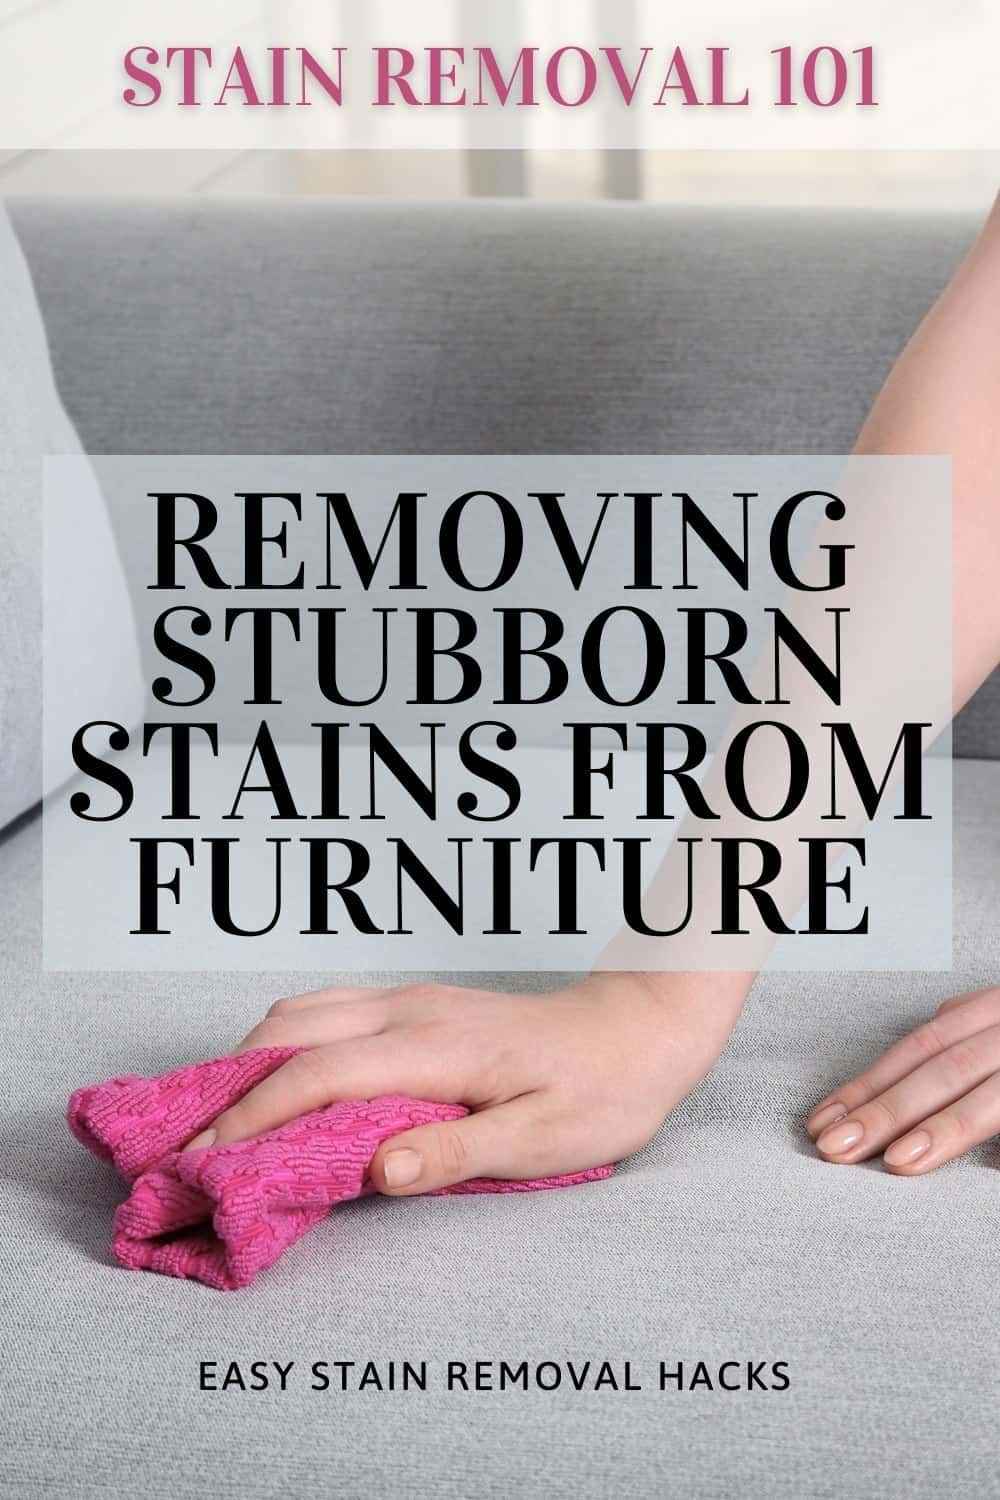 Accidents happen! Are you stuck with a stubborn stain on your furniture? Check out these easy stain removal hacks to remove those pesky stains. 